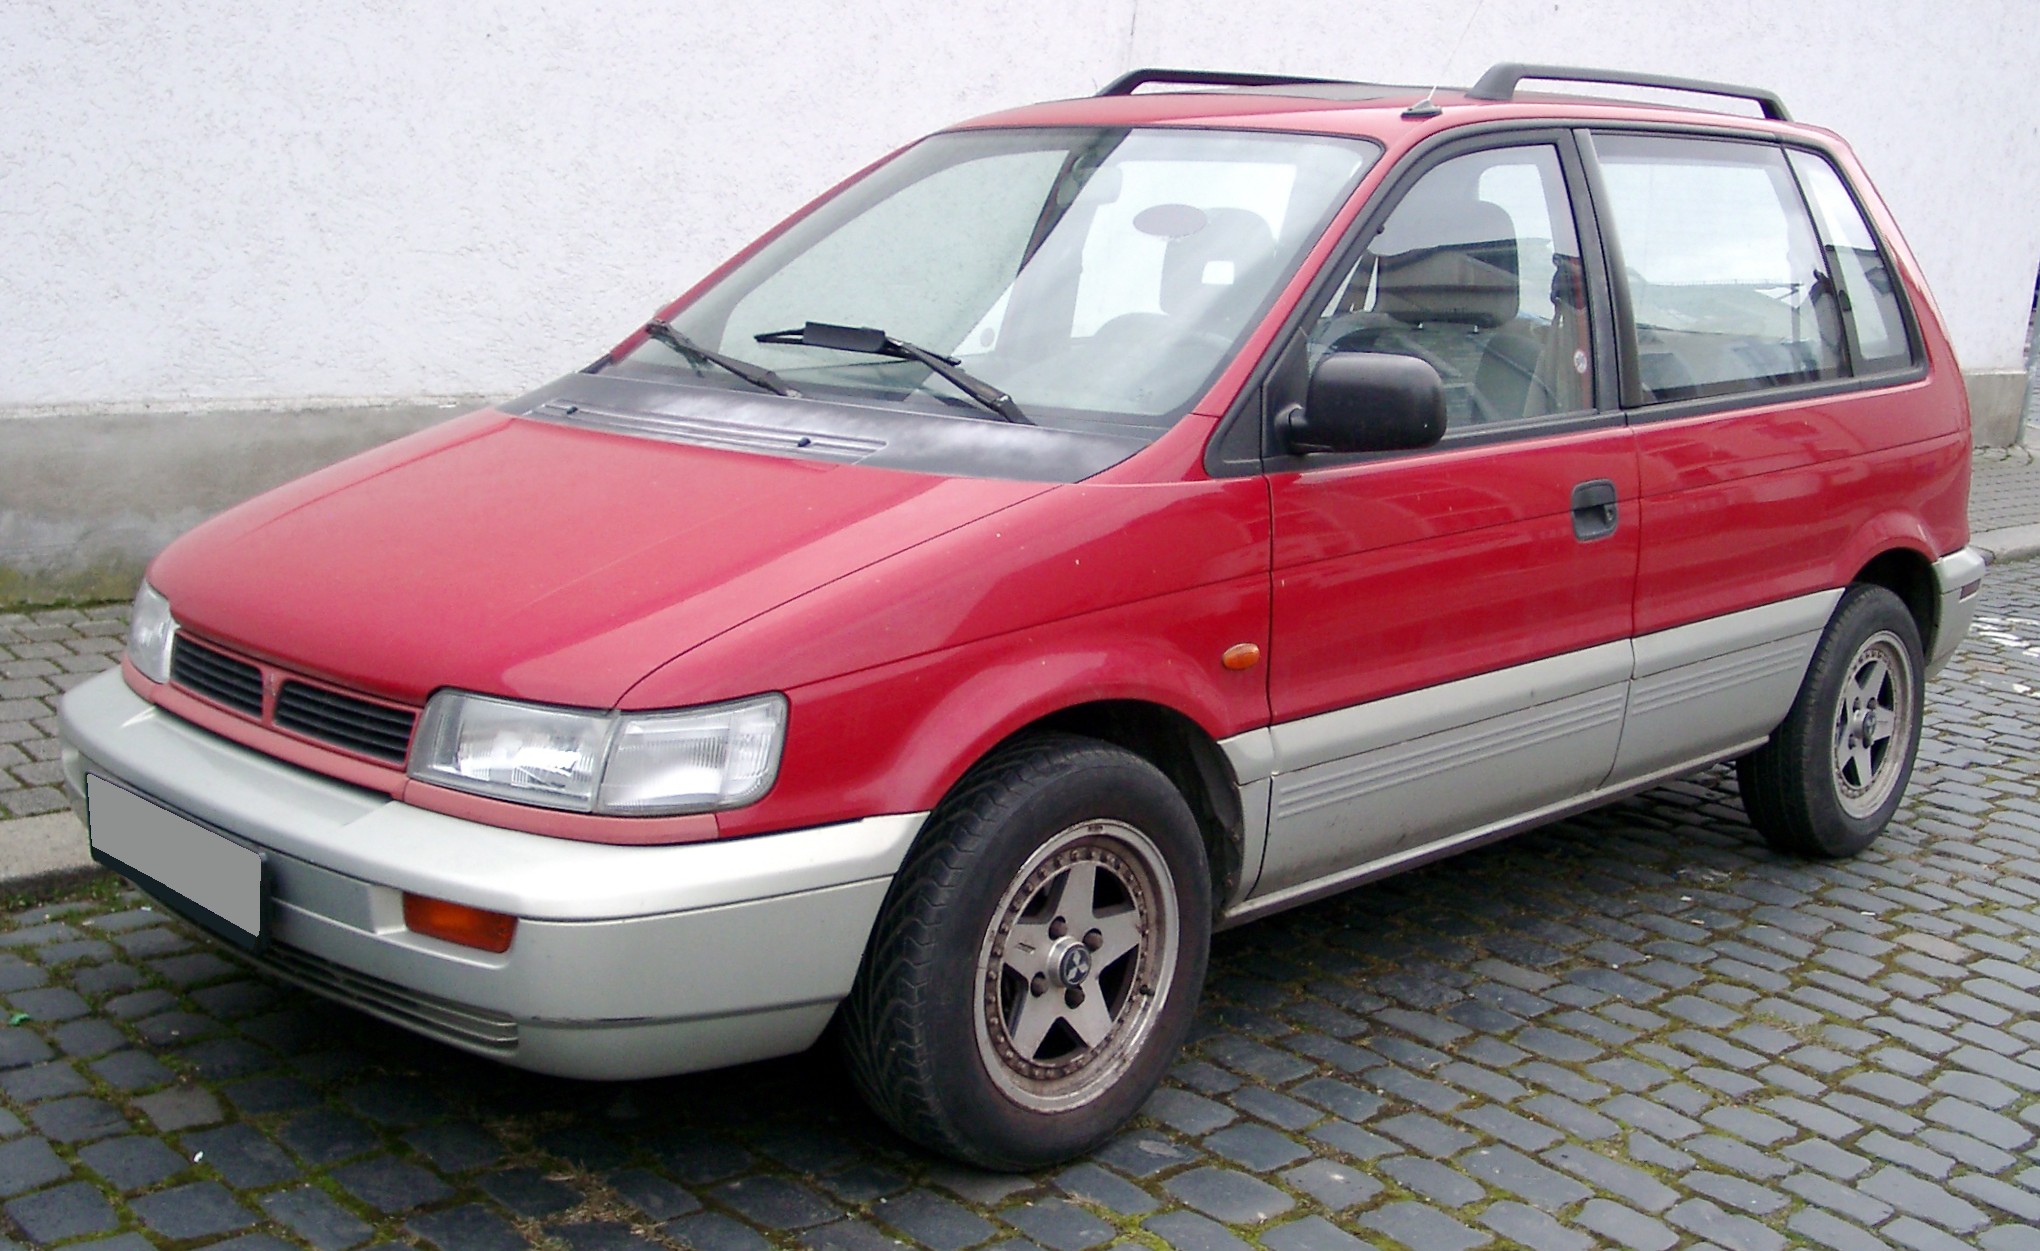 Mitsubishi Space Runner technical details, history, photos